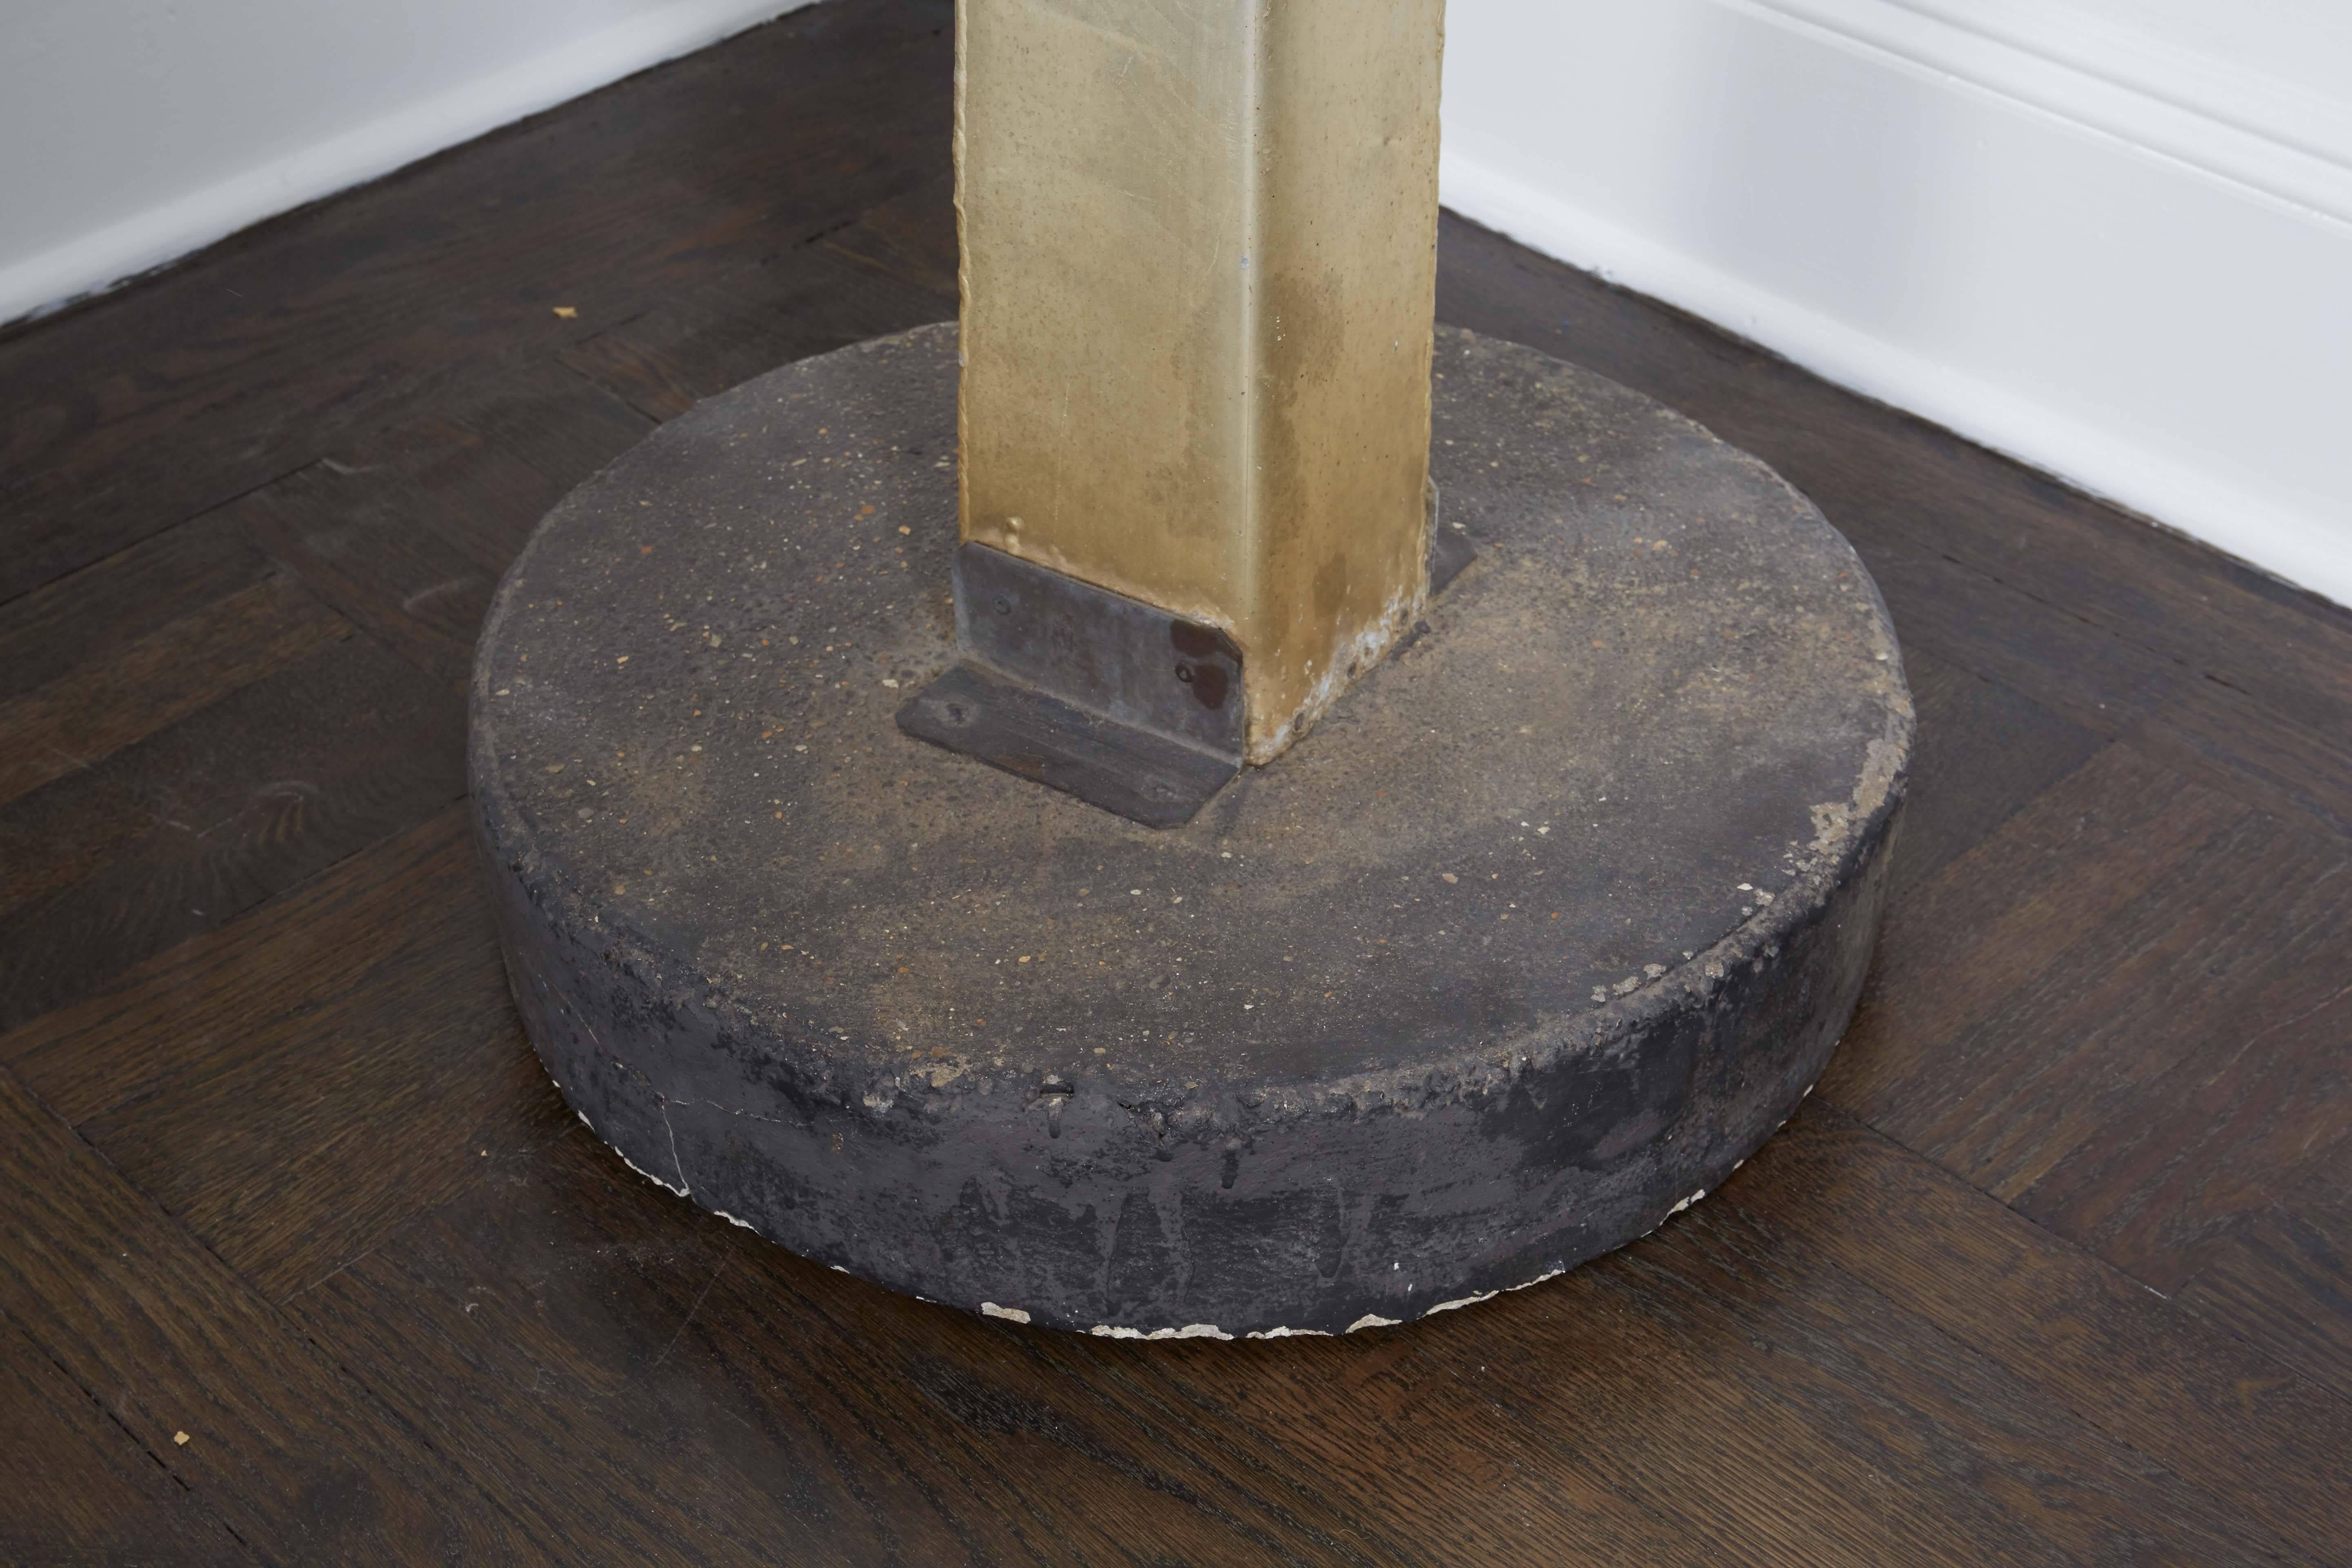 Guy Lartiques, Sculpture in cut and welded metal, cement base .

Signed: Guy Lartique 73